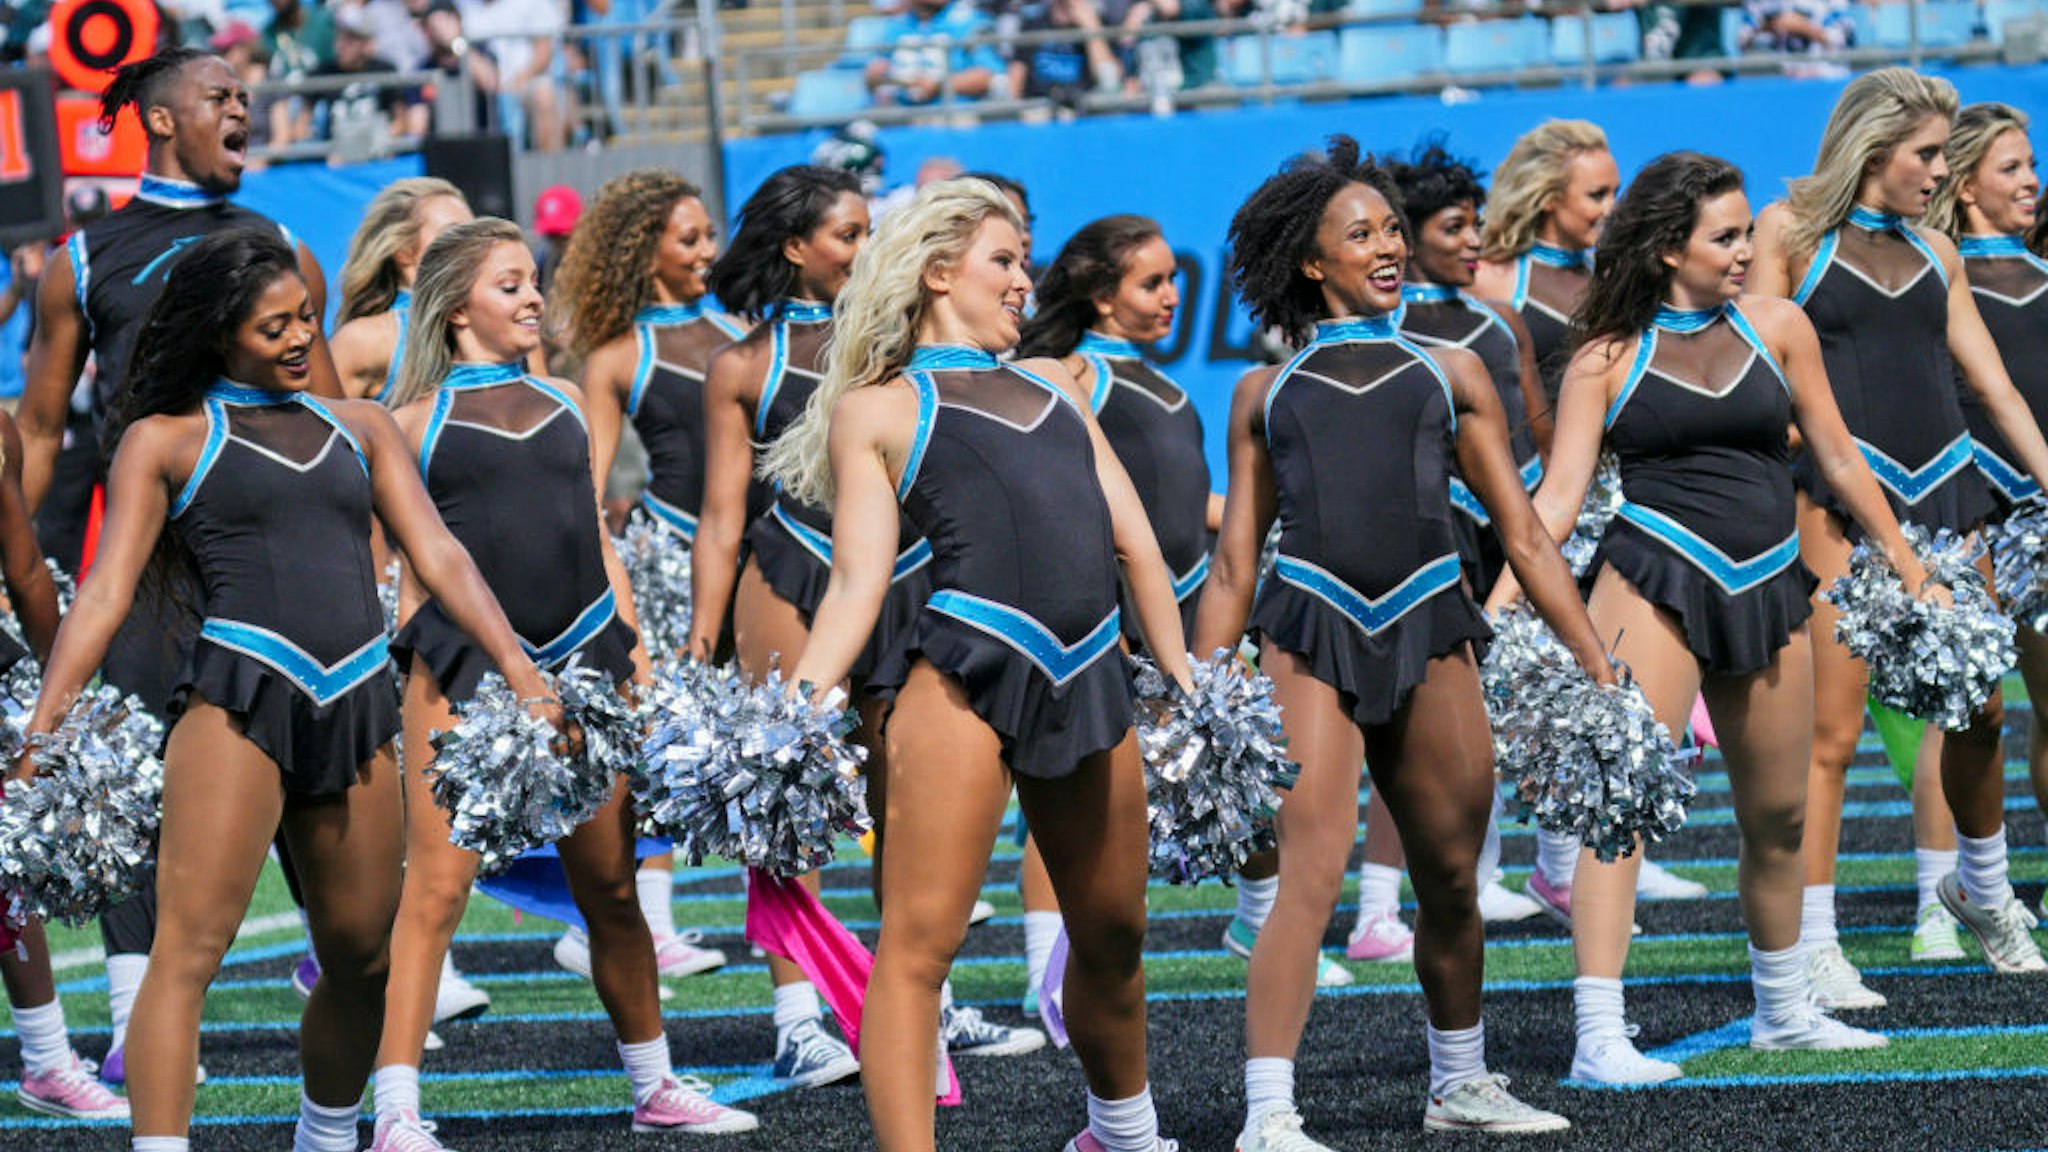 Carolina Panthers cheerleaders perform during the game between the Carolina Panthers and the Philadelphia Eagles on October 10, 2021 at Bank of America Stadium in Charlotte, NC.